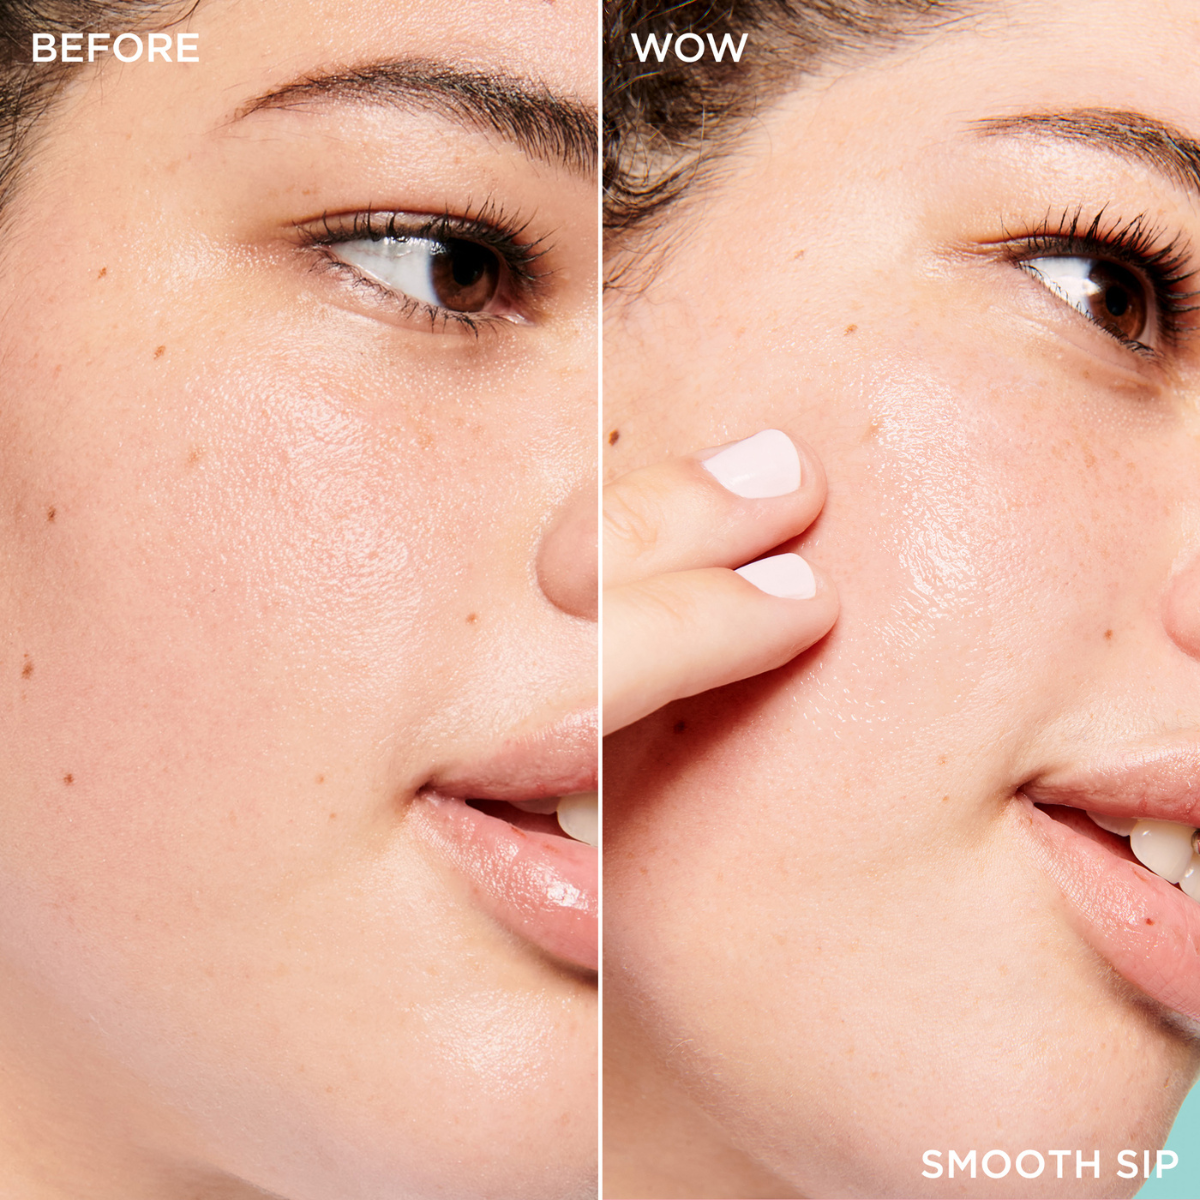 Before and after using Pore Routine Roundup Pore Care Set